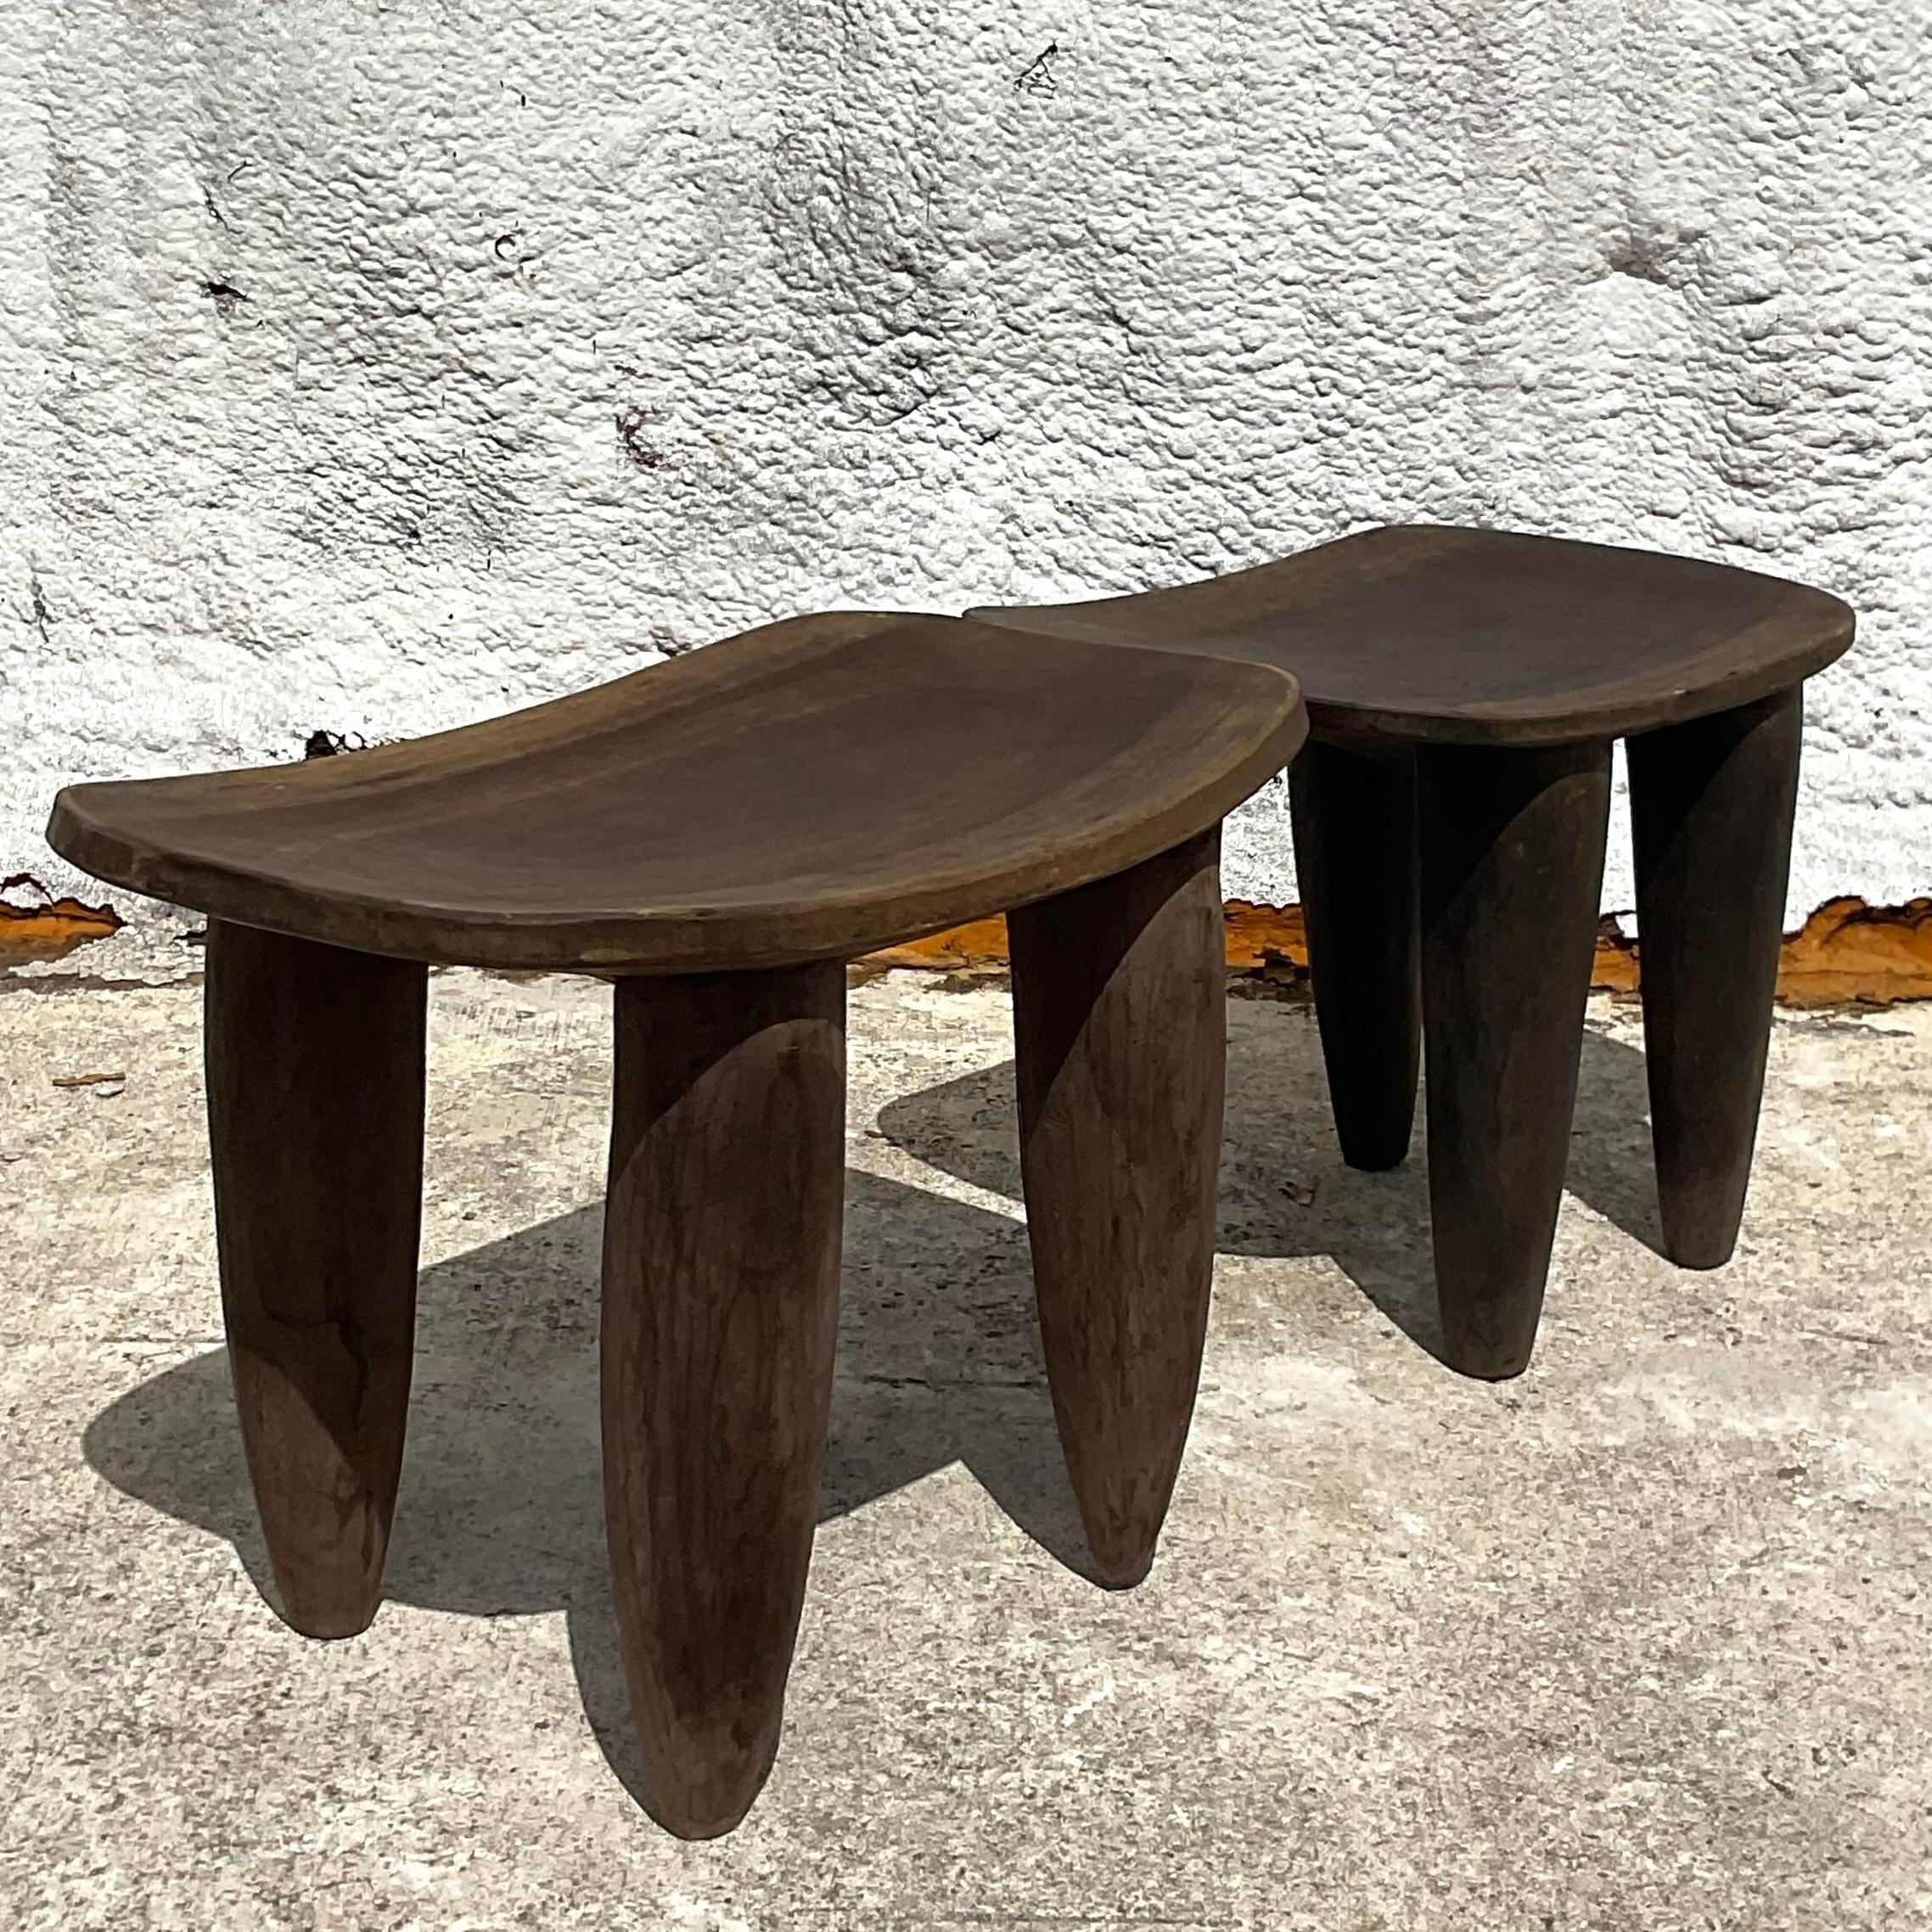 South African Late 20th Century Vintage Boho African Senufo Low Stools - a Pair For Sale